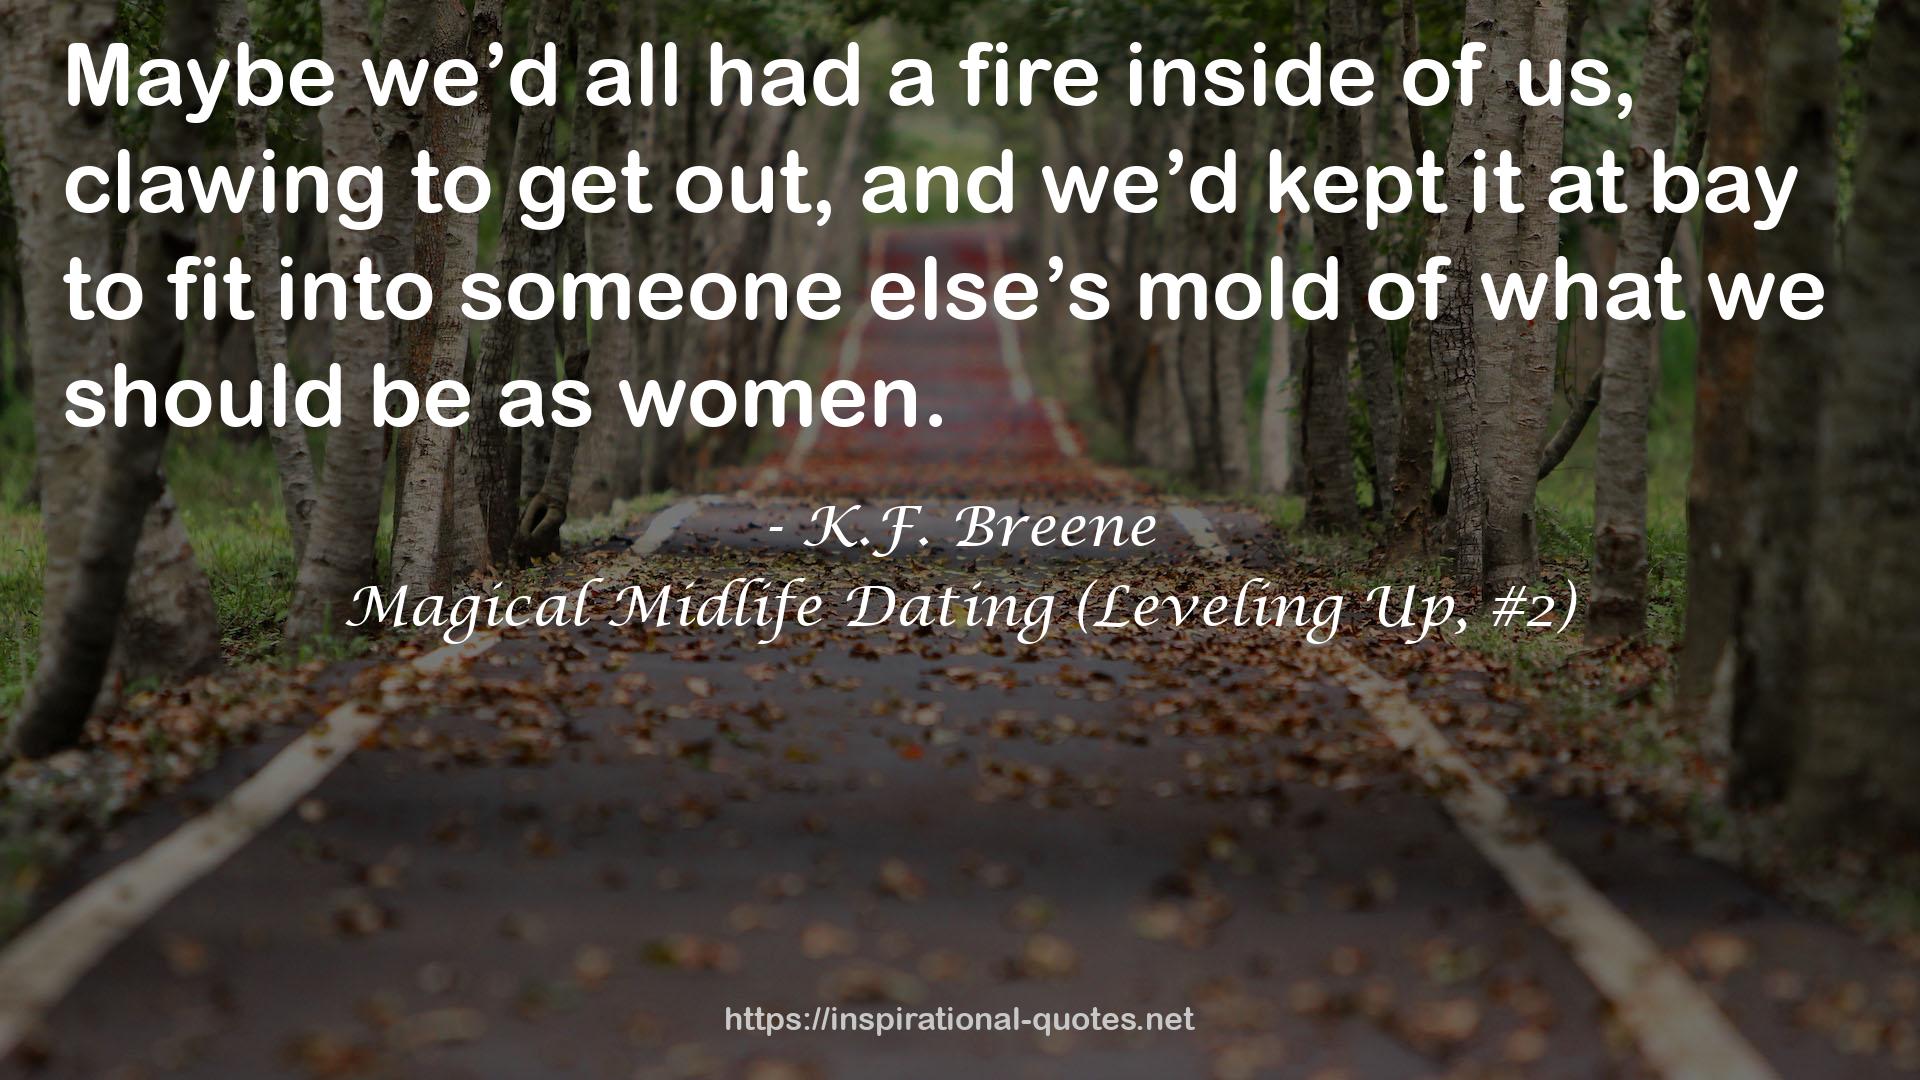 Magical Midlife Dating (Leveling Up, #2) QUOTES